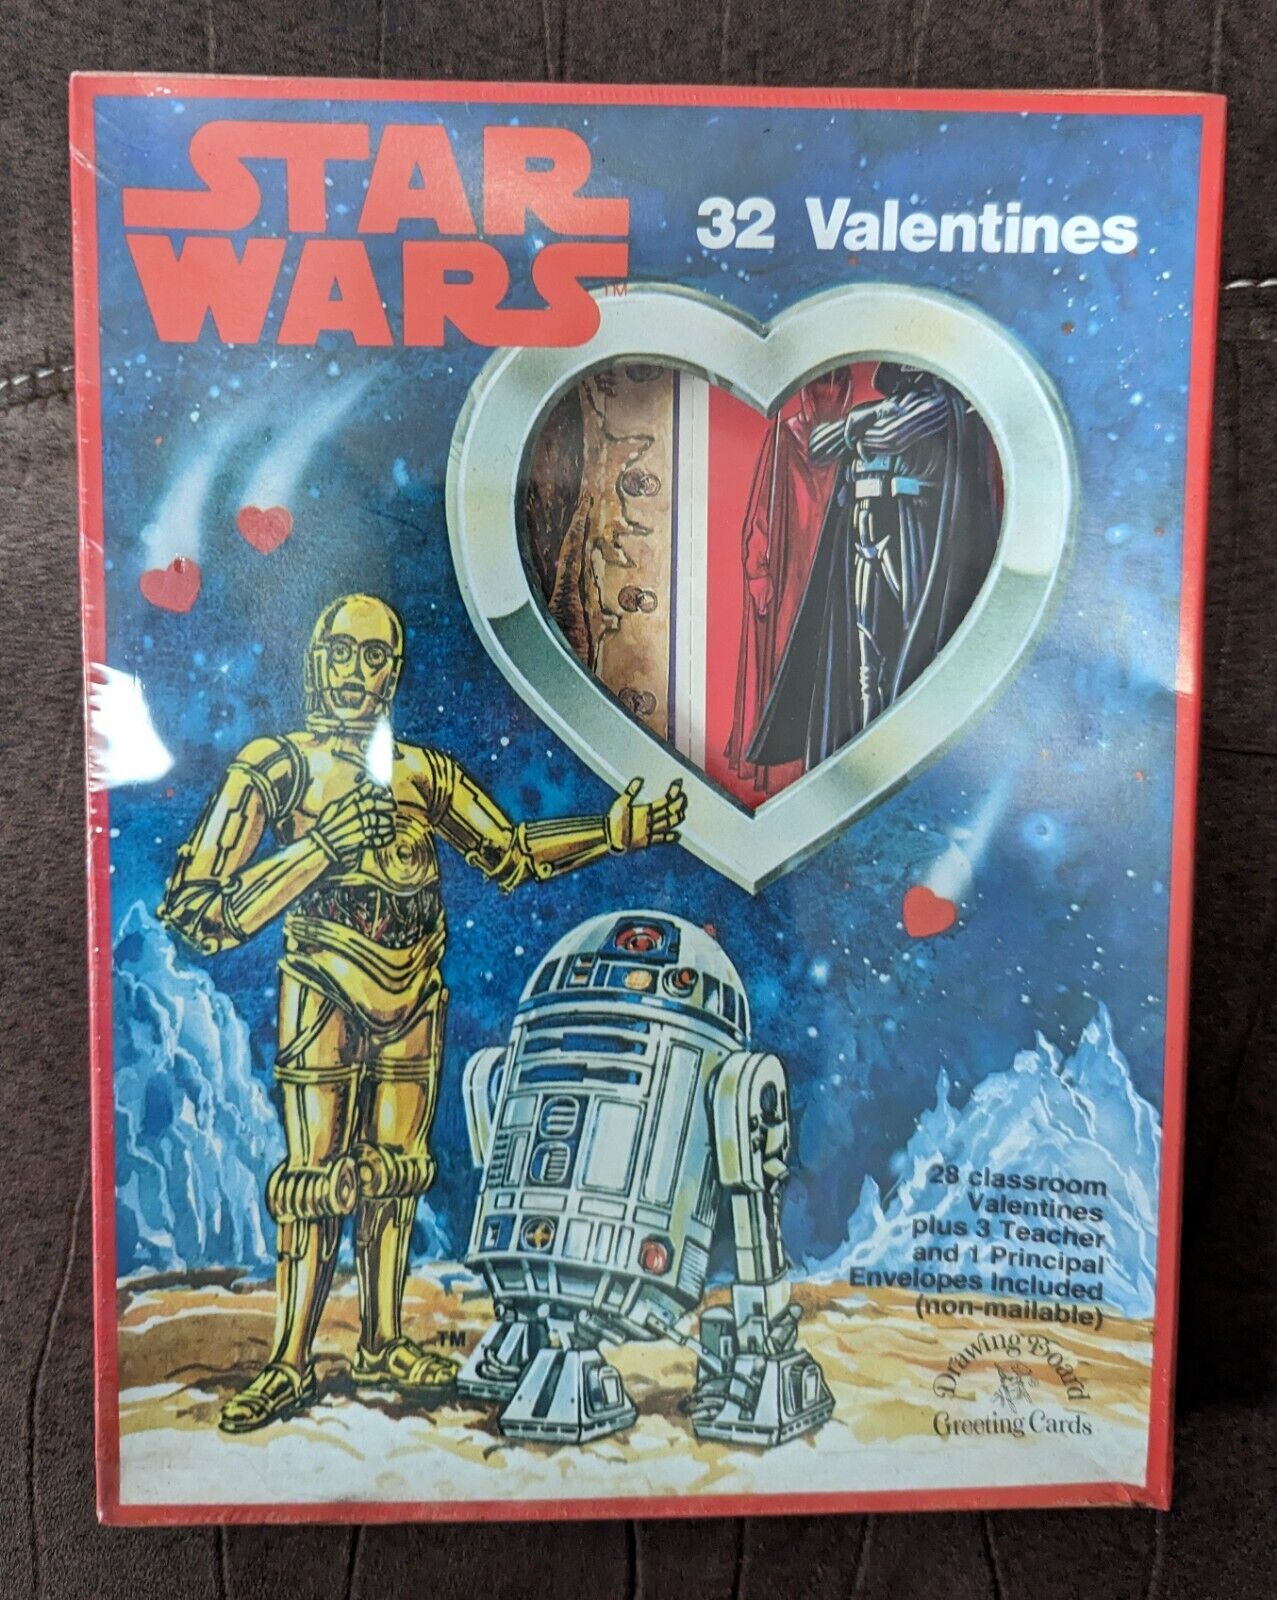 1984 Star Wars Valentine Cards-32 Count Factory Sealed Box-C3-PO, R2-D2 On Front